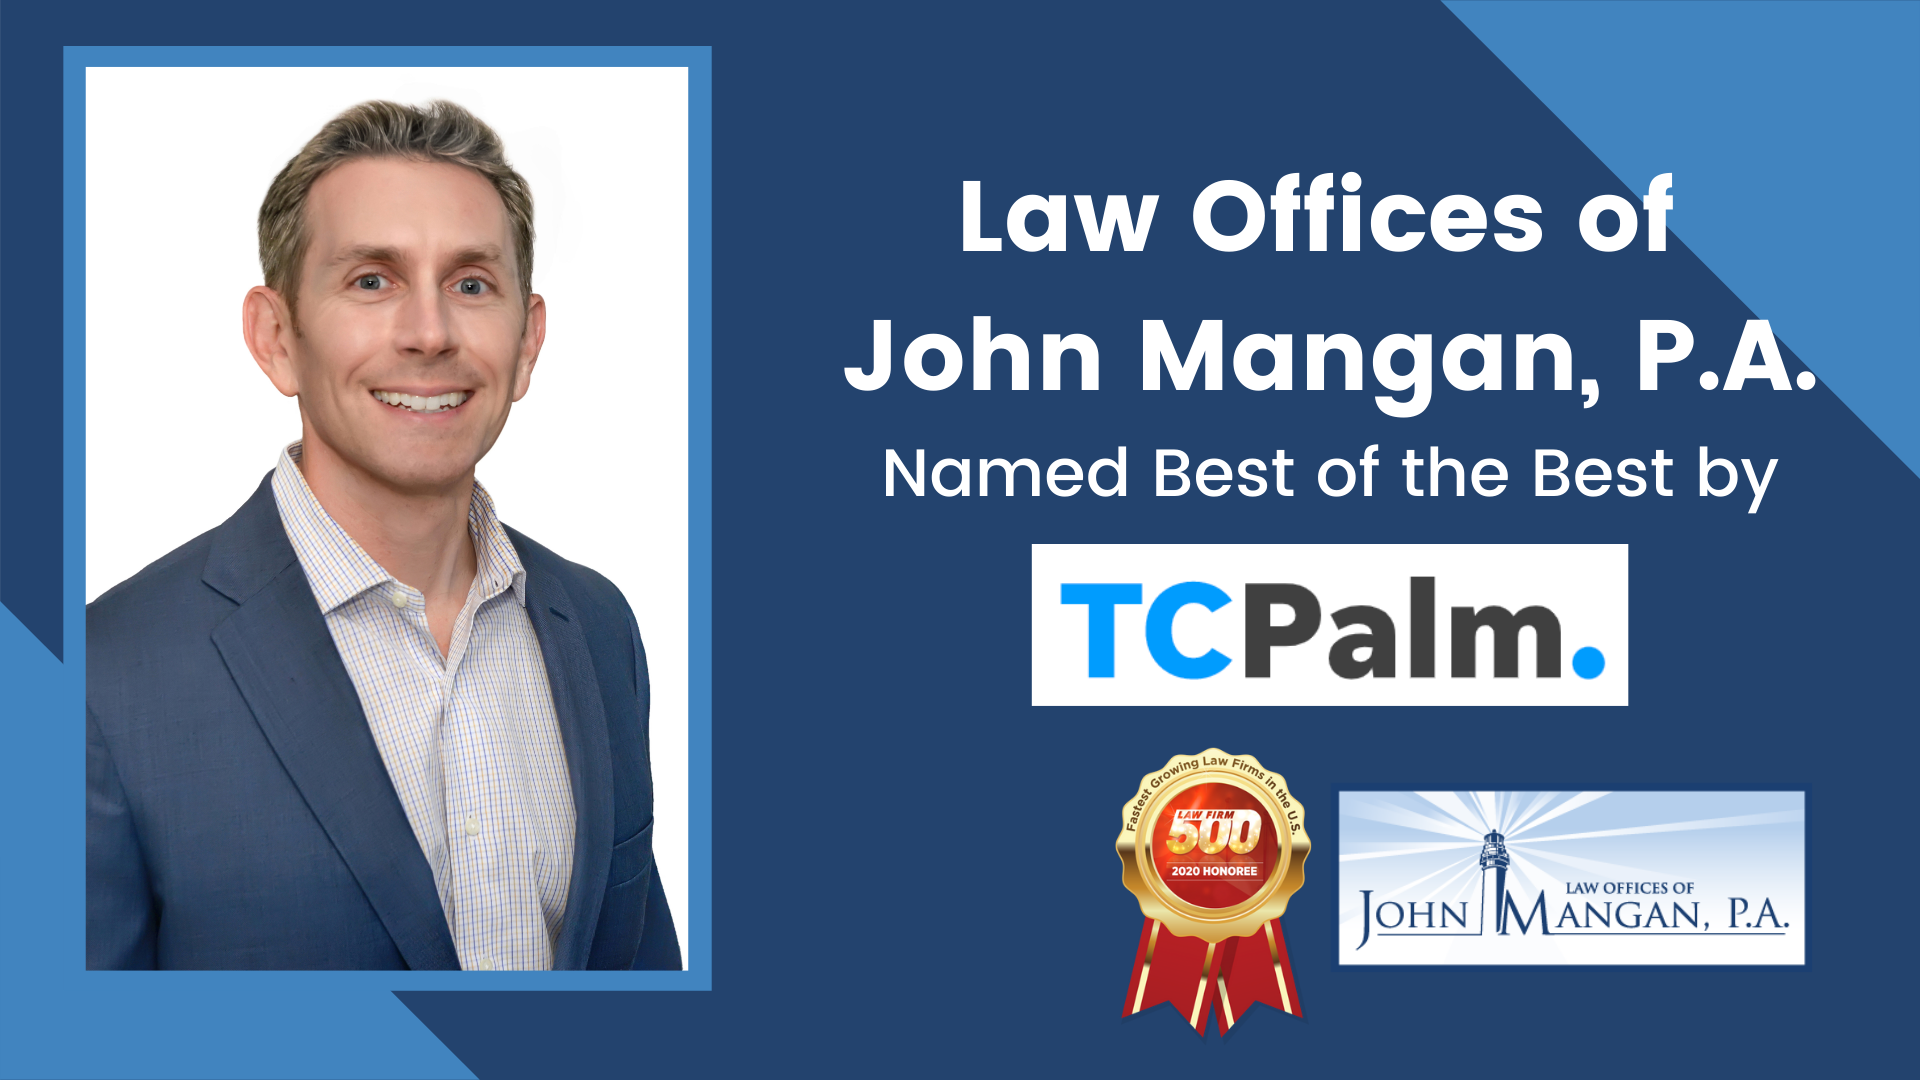 Visit the John Mangan FREE legal video library. Serving St. Lucie County, St. Lucie West, Tradition, Port St. Lucie, St. Lucie Village, Fort Pierce, White City, Viking, River Park, Lakewood Park, Hutchinson Island. Contact Us